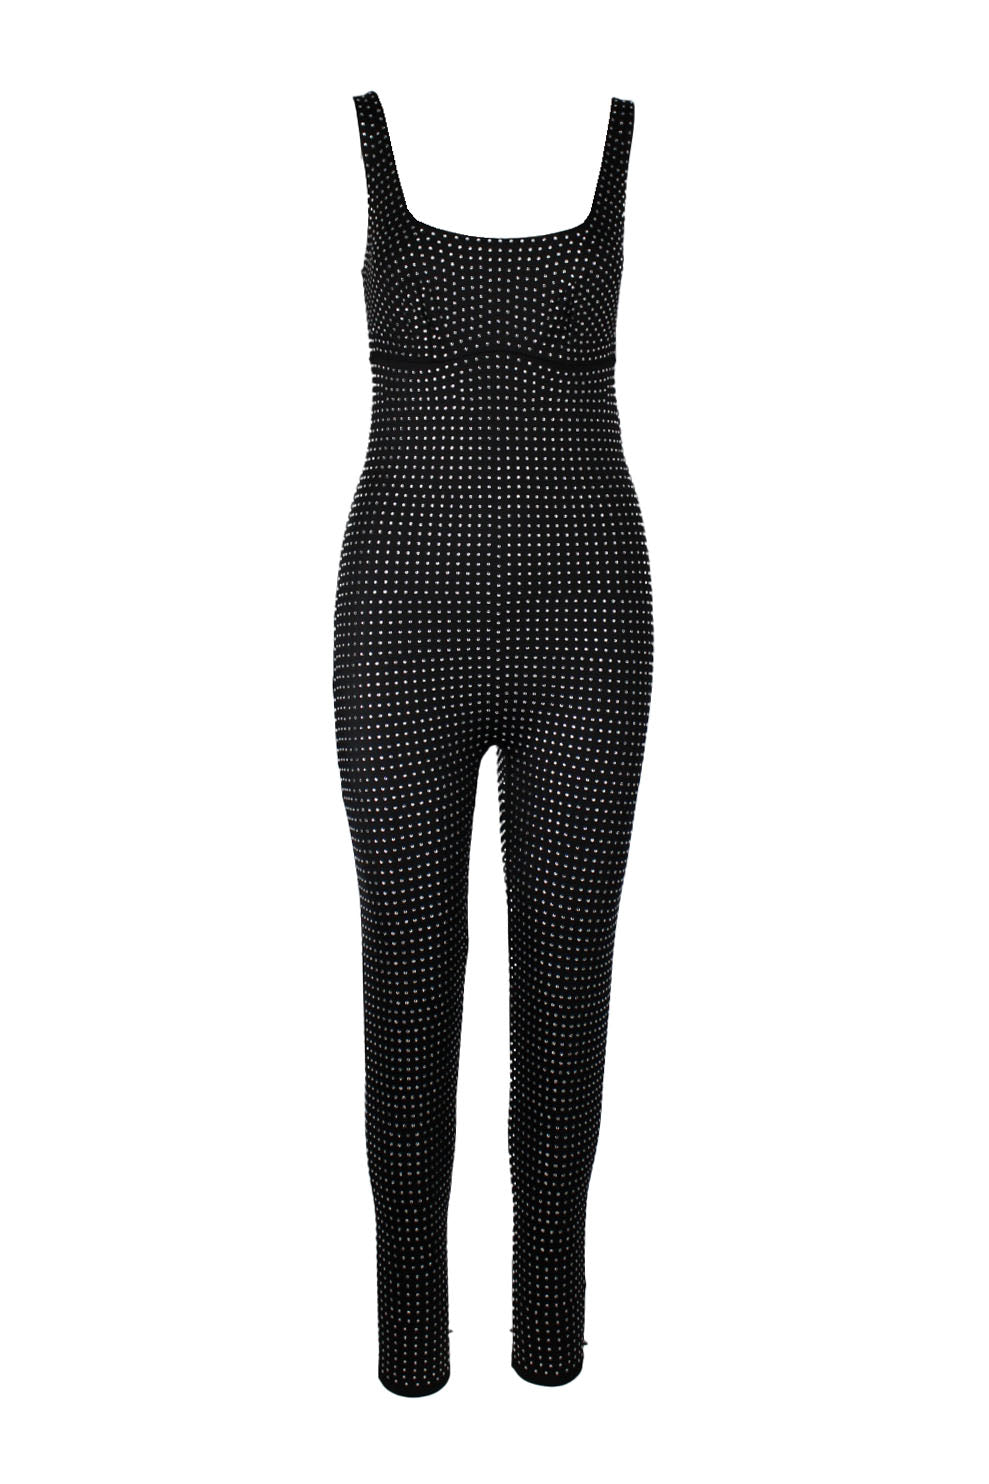 description: yitty black rhinestone sleeveless jumpsuit. features rounded neckline, fitted style, and slip on style. 